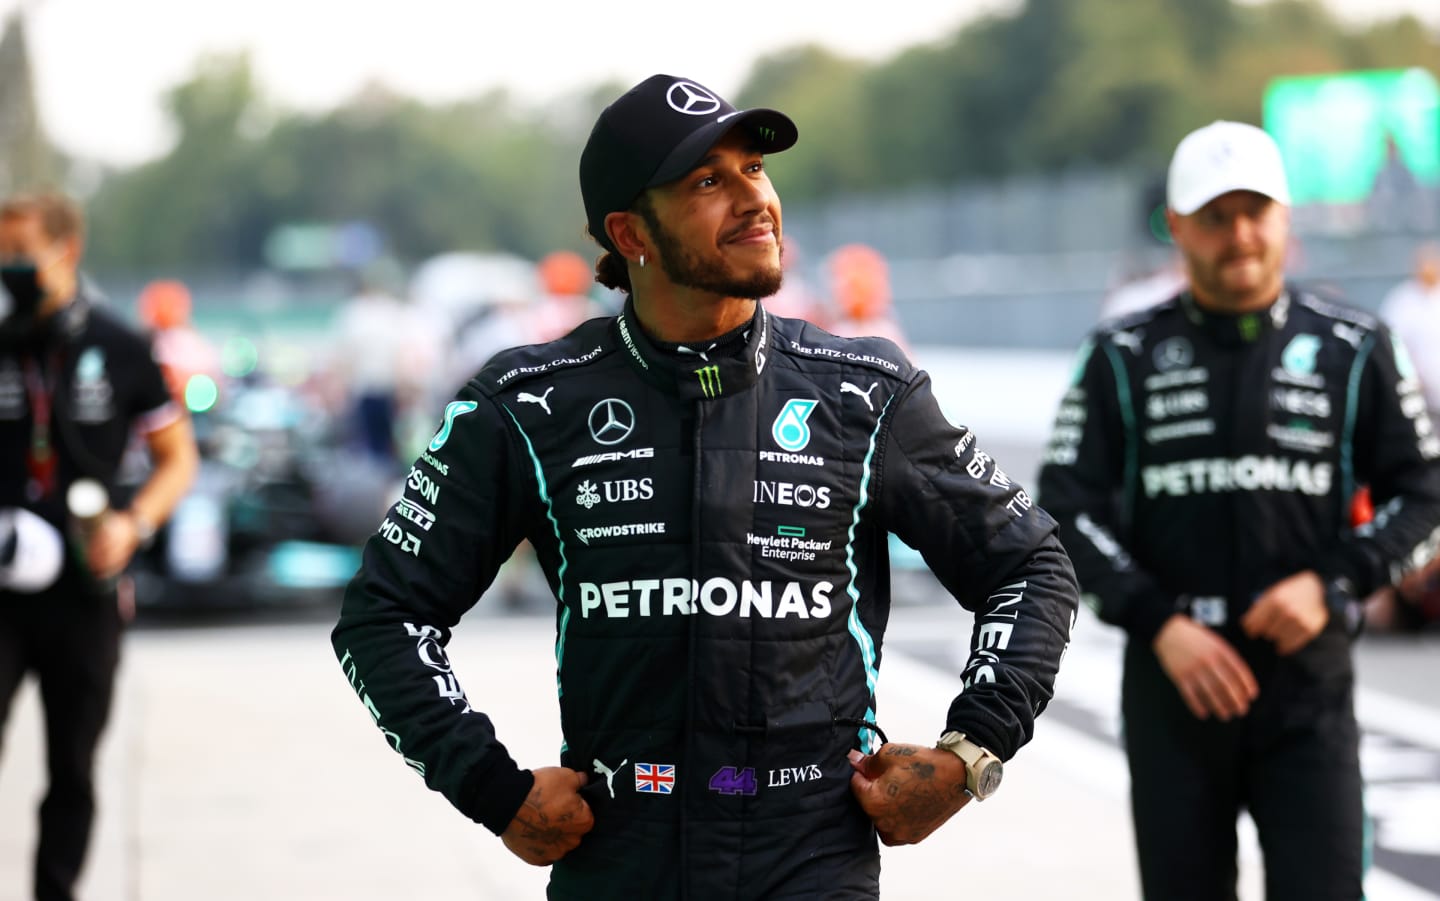 MONZA, ITALY - SEPTEMBER 10: Second place qualifier Lewis Hamilton of Great Britain and Mercedes GP looks on in parc ferme during qualifying ahead of the F1 Grand Prix of Italy at Autodromo di Monza on September 10, 2021 in Monza, Italy. (Photo by Bryn Lennon/Getty Images)